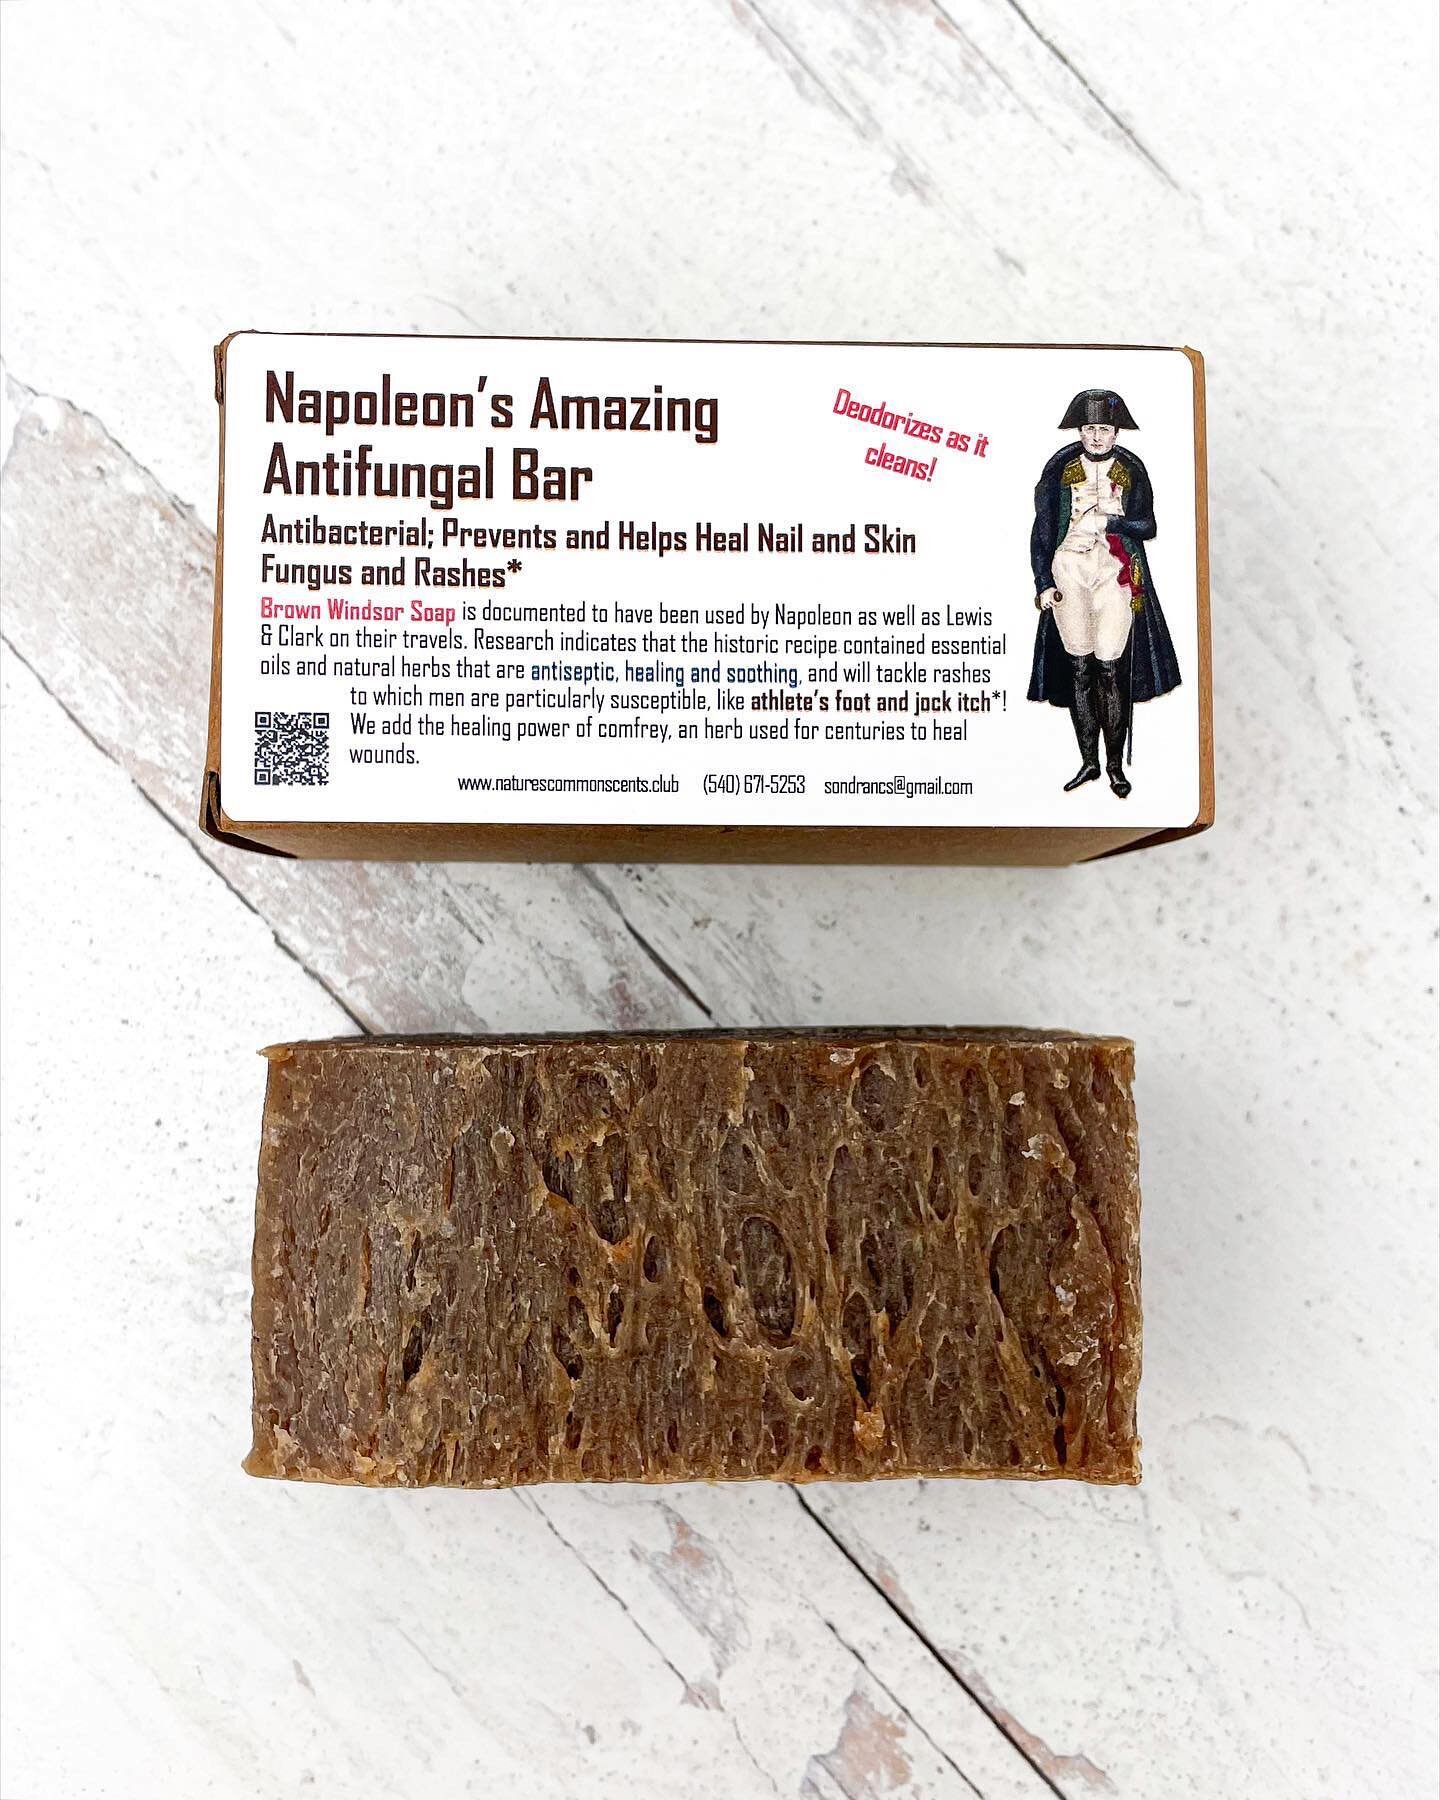 Yes, Napoleon had a favorite soap; it was called Brown Windsor which was especially effective for men&rsquo;s skin issues. We match the ingredients in his favorite soap, including the herbs that heal rashes and fungal infections men are particularly 